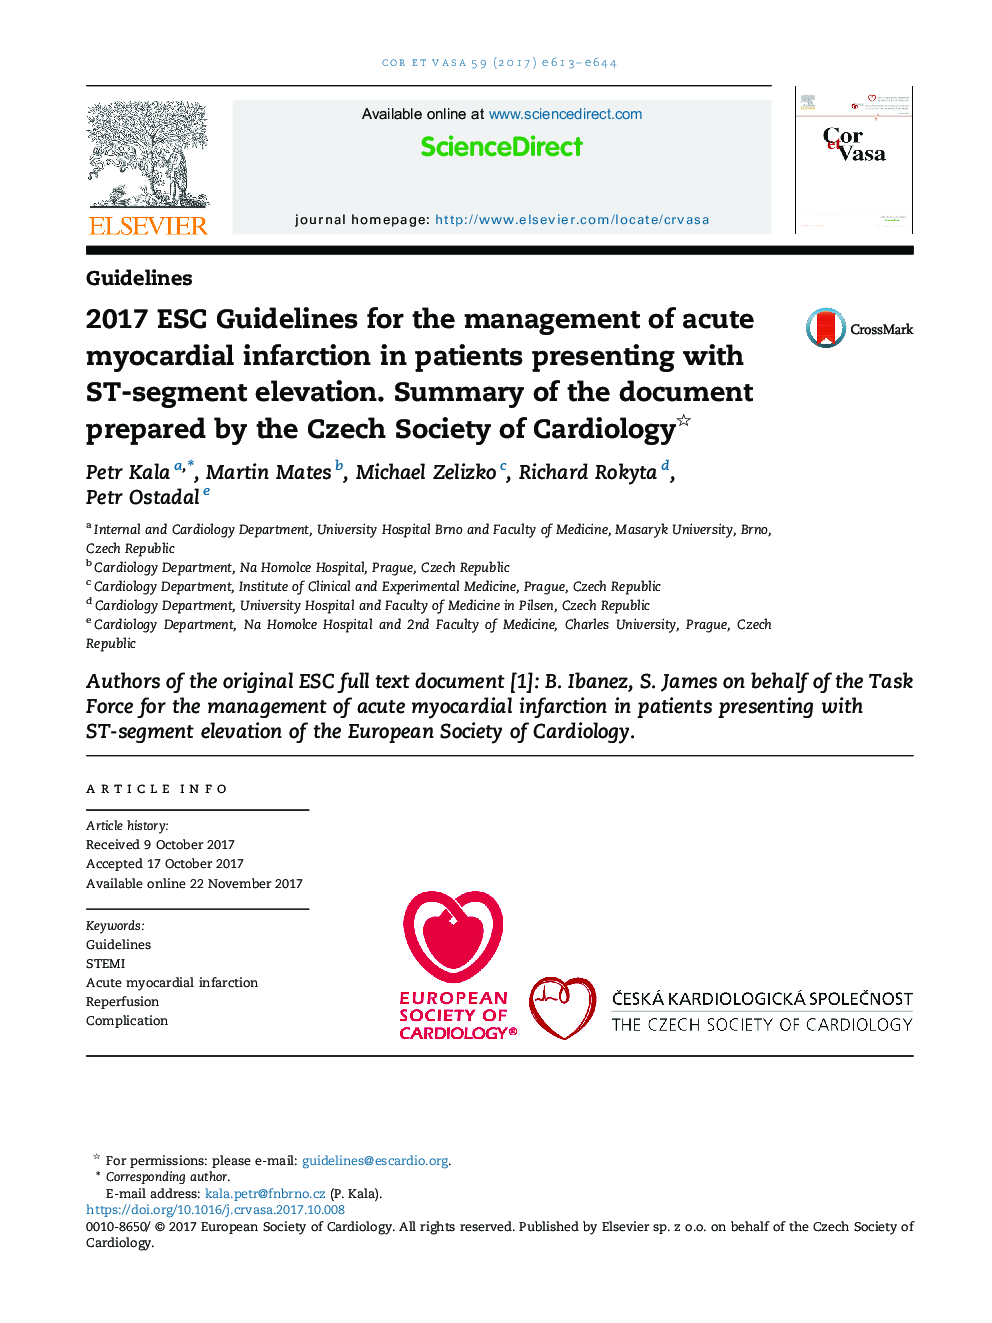 2017 ESC Guidelines for the management of acute myocardial infarction in patients presenting with ST-segment elevation. Summary of the document prepared by the Czech Society of Cardiology